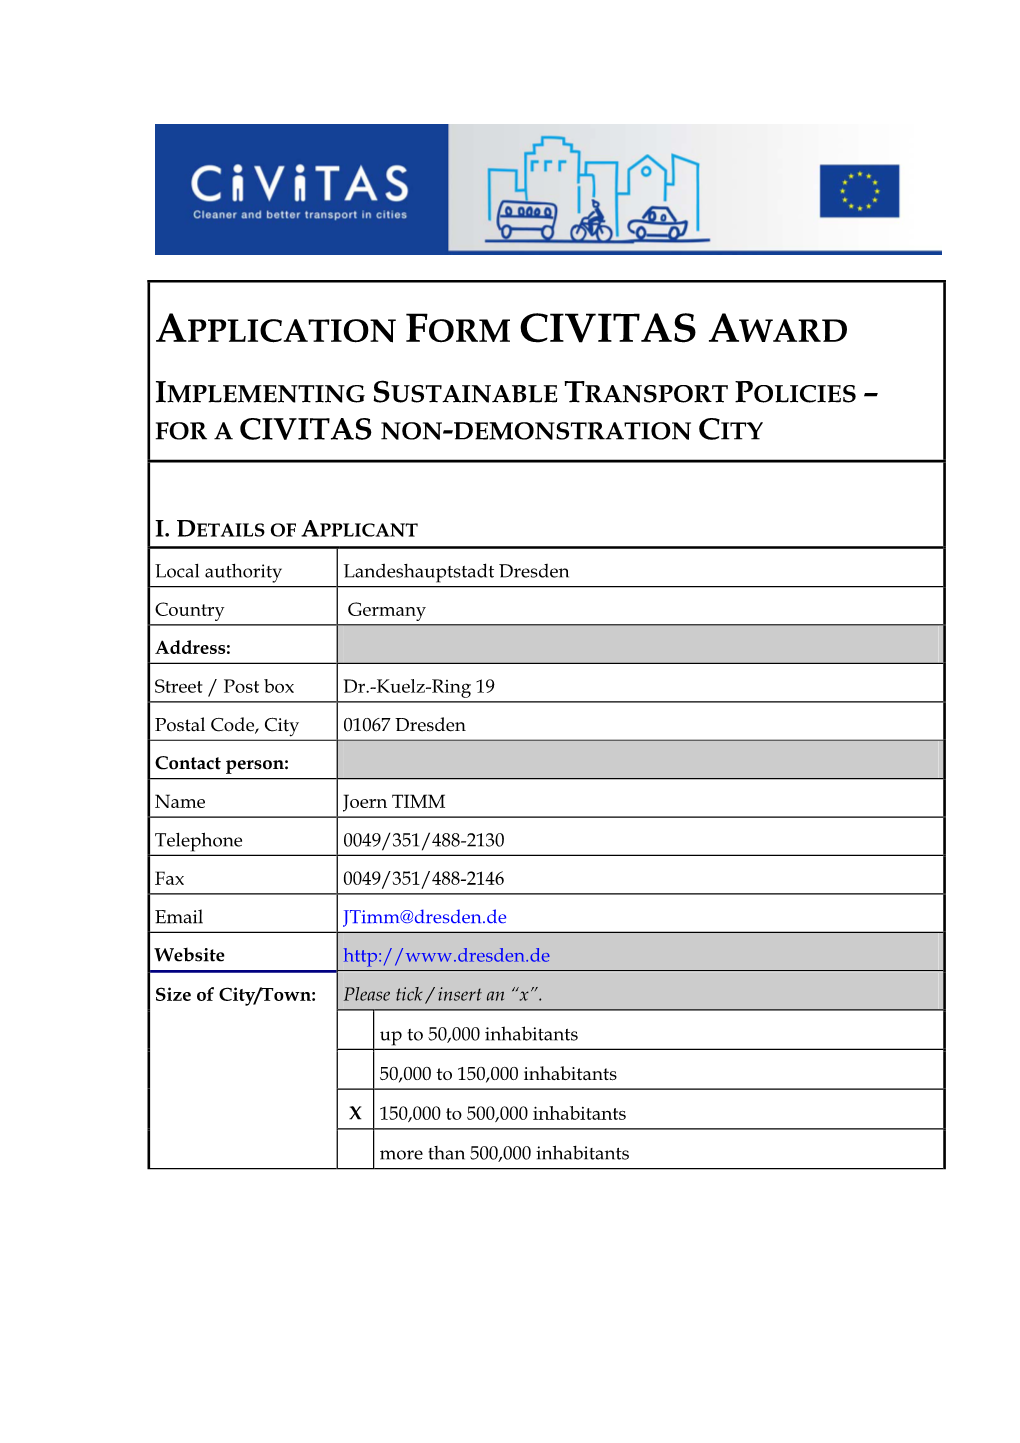 Application Form Civitas Award Implementing Sustainable Transport Policies